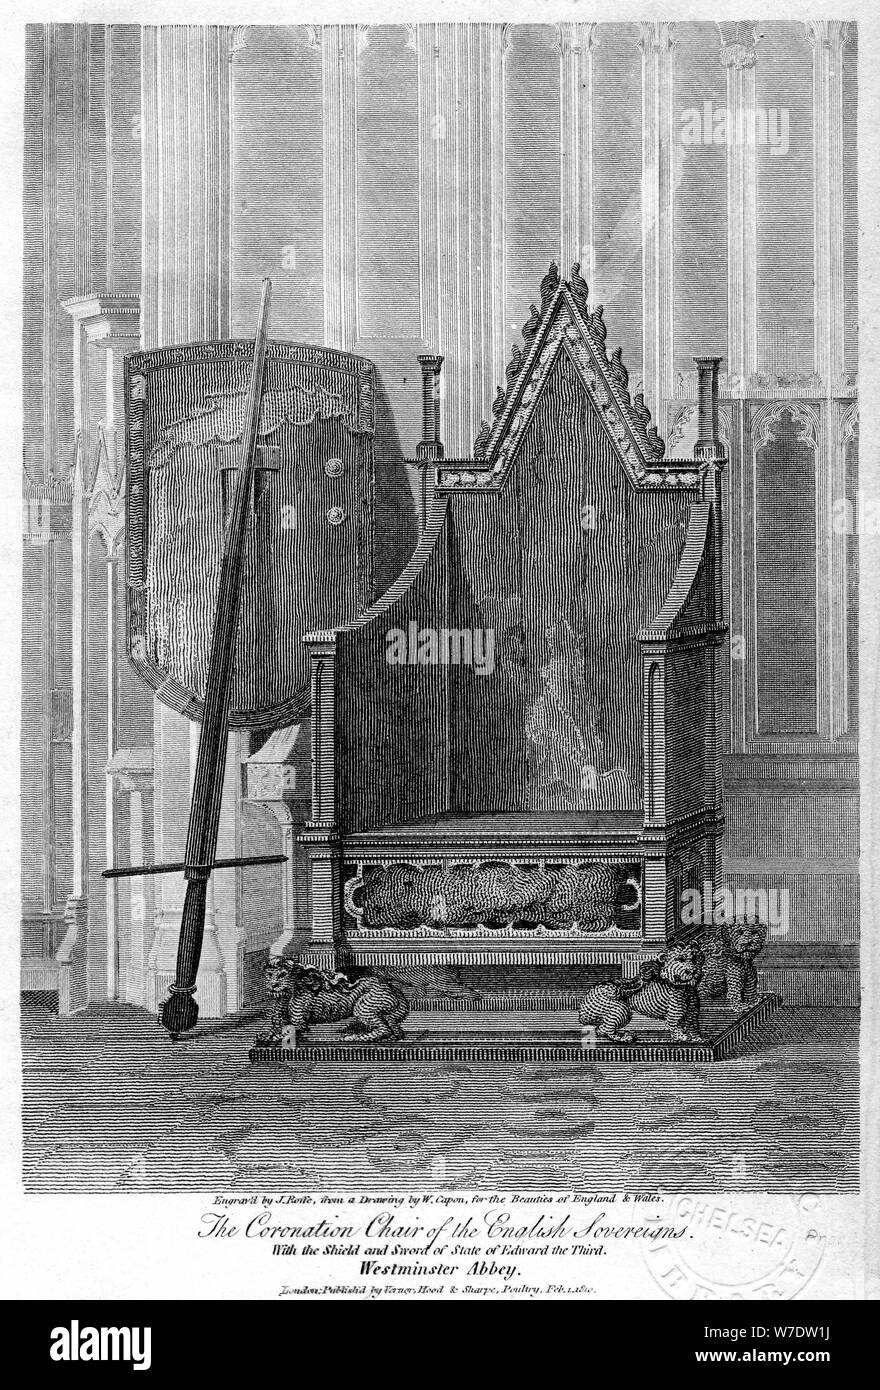 The coronation chair of the English sovereigns, Westminster Abbey, London, 1810.Artist: John Roffe Stock Photo